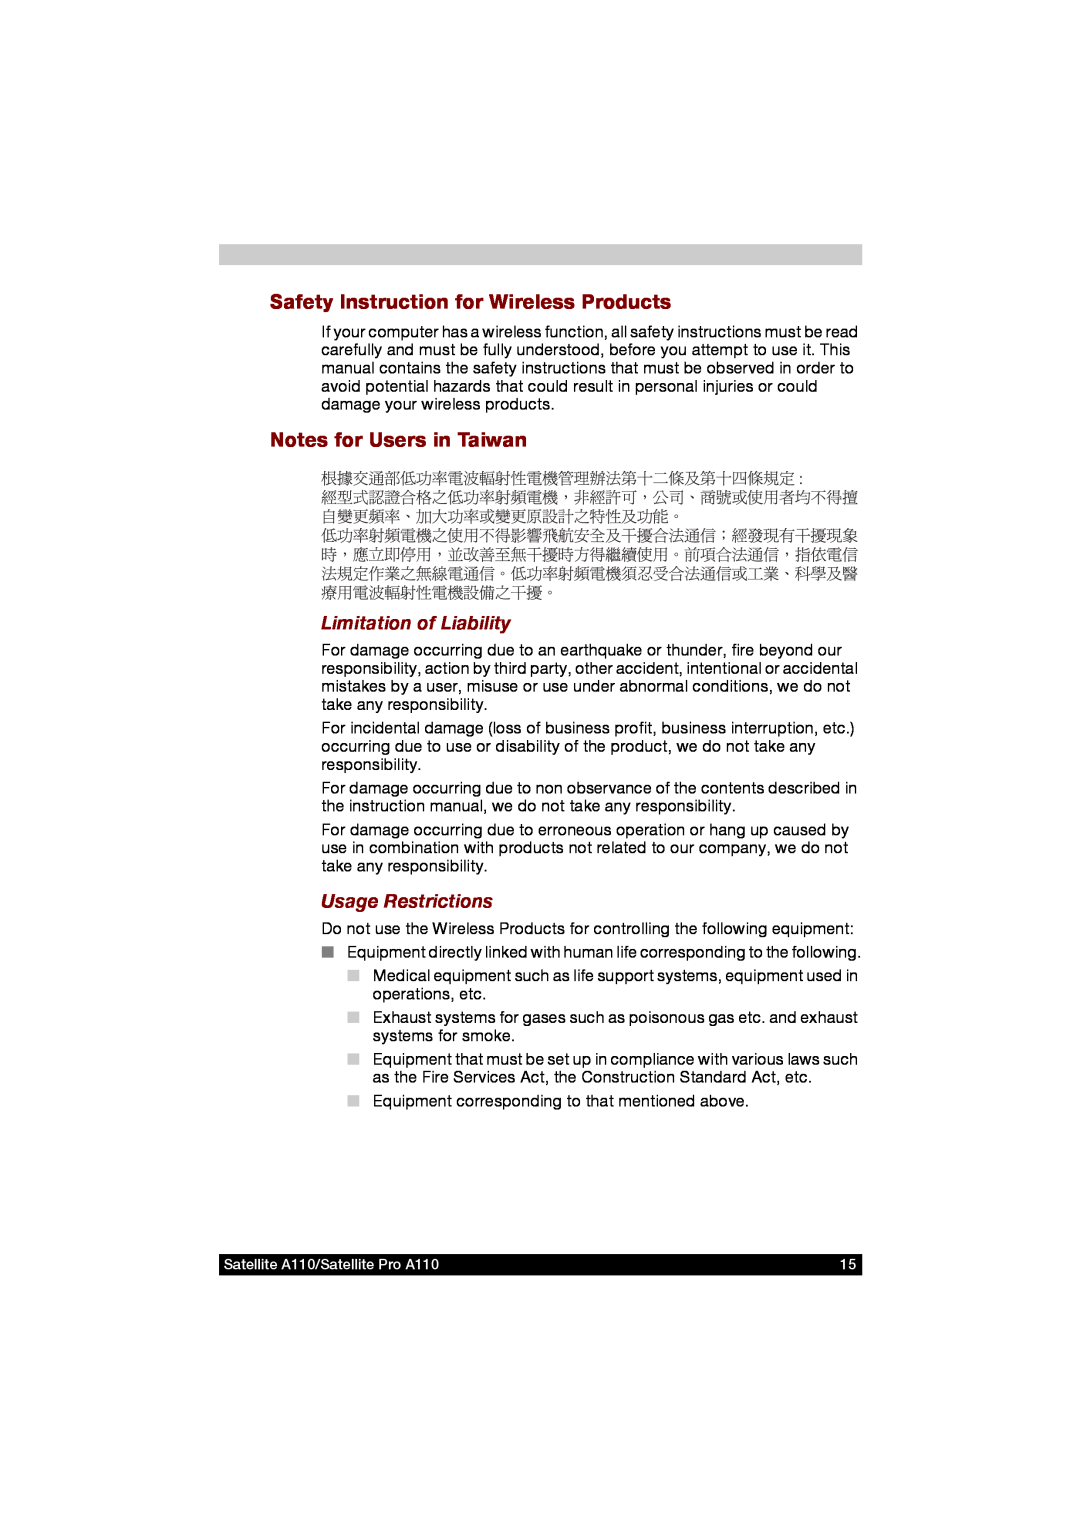 Toshiba A110 user manual Safety Instruction for Wireless Products, Notes for Users in Taiwan, Limitation of Liability 